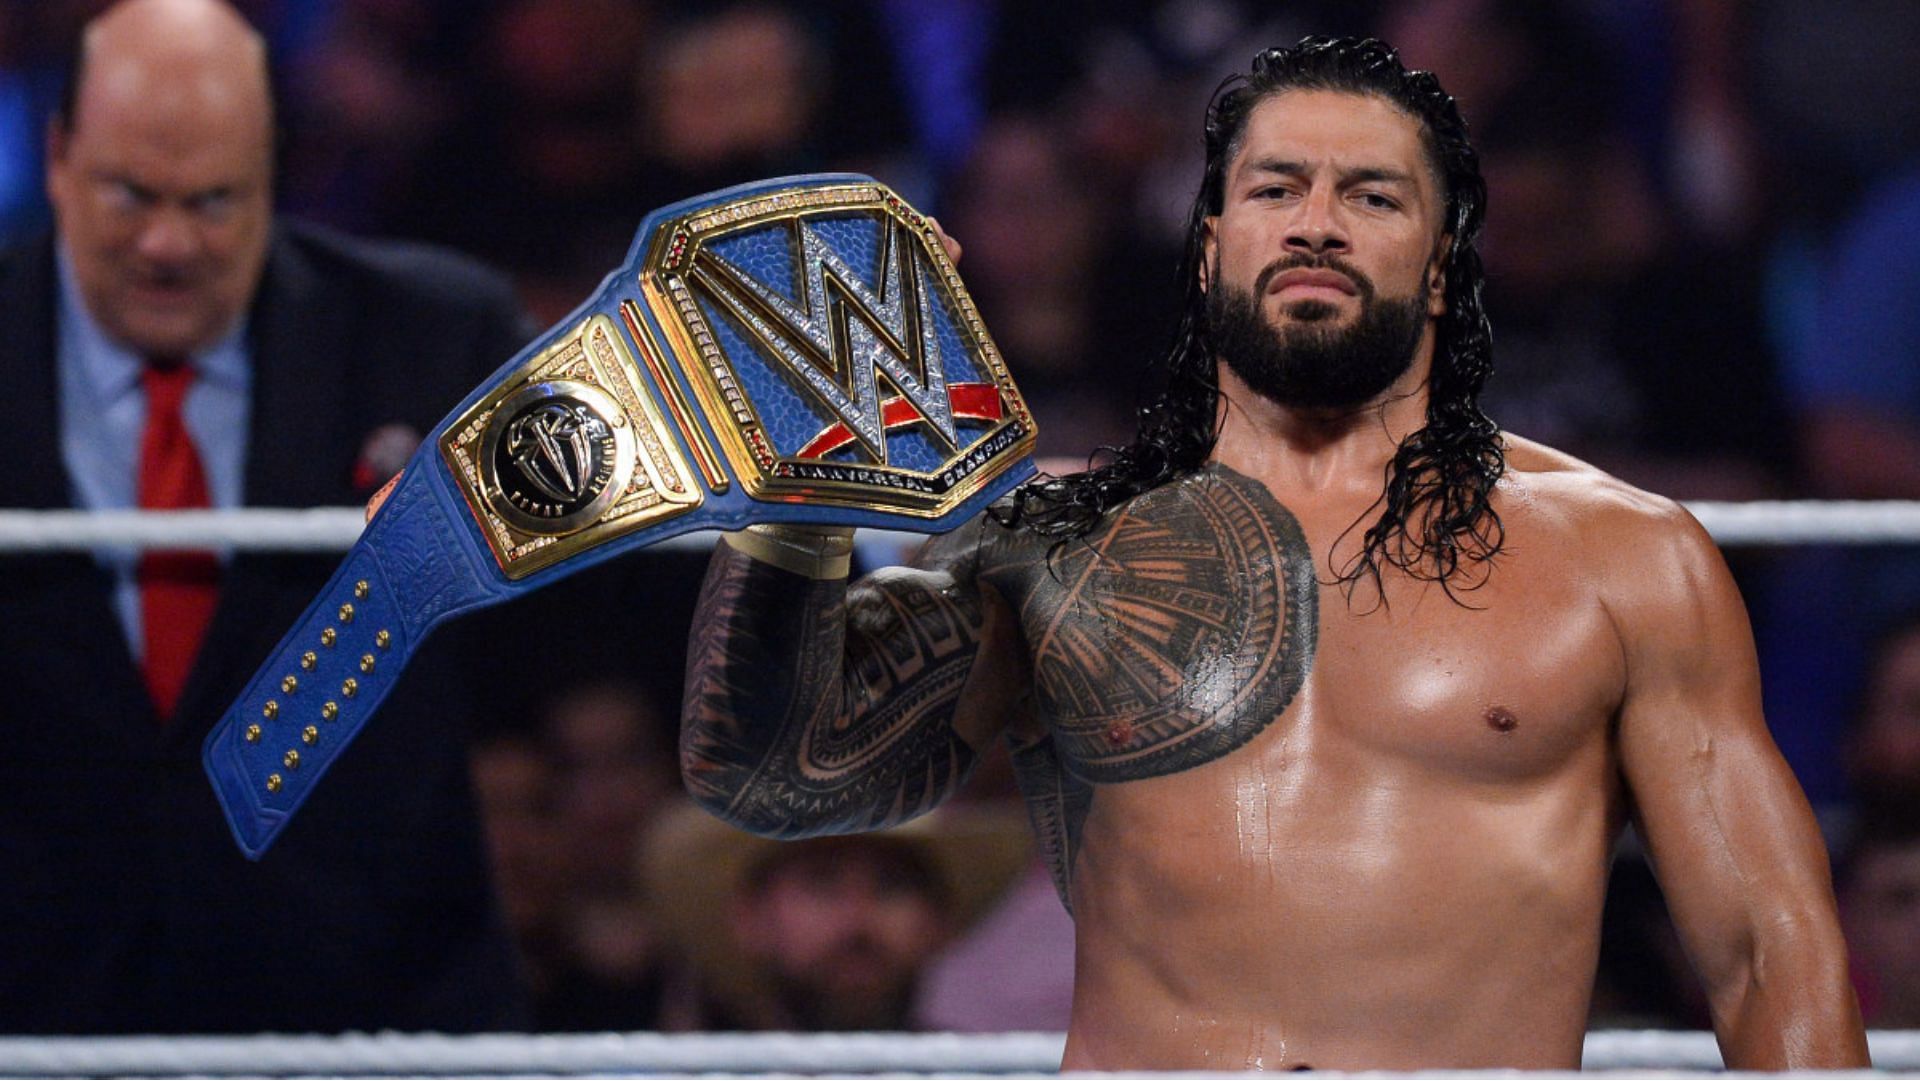 Roman Reigns will mark 1000th day as champion at Night of Champions